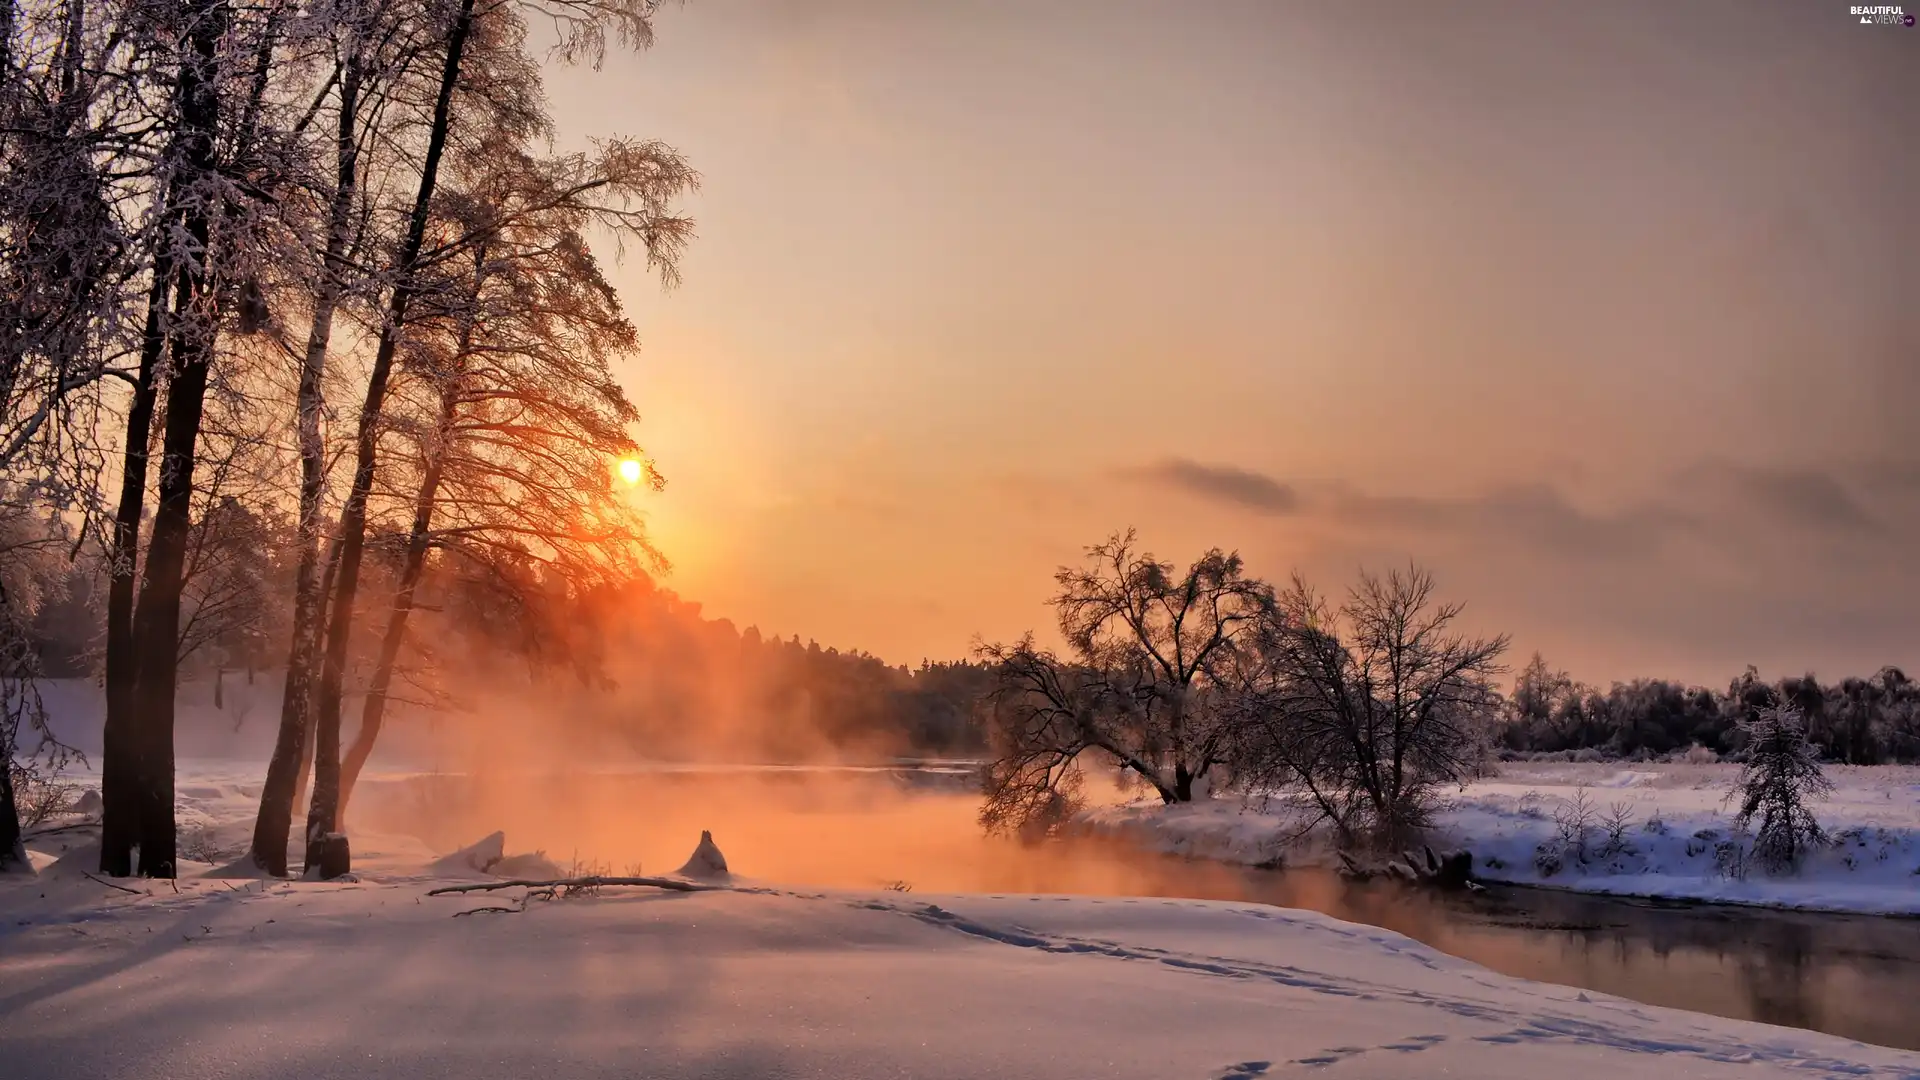 River, dawn, viewes, forest, winter, trees, Fog